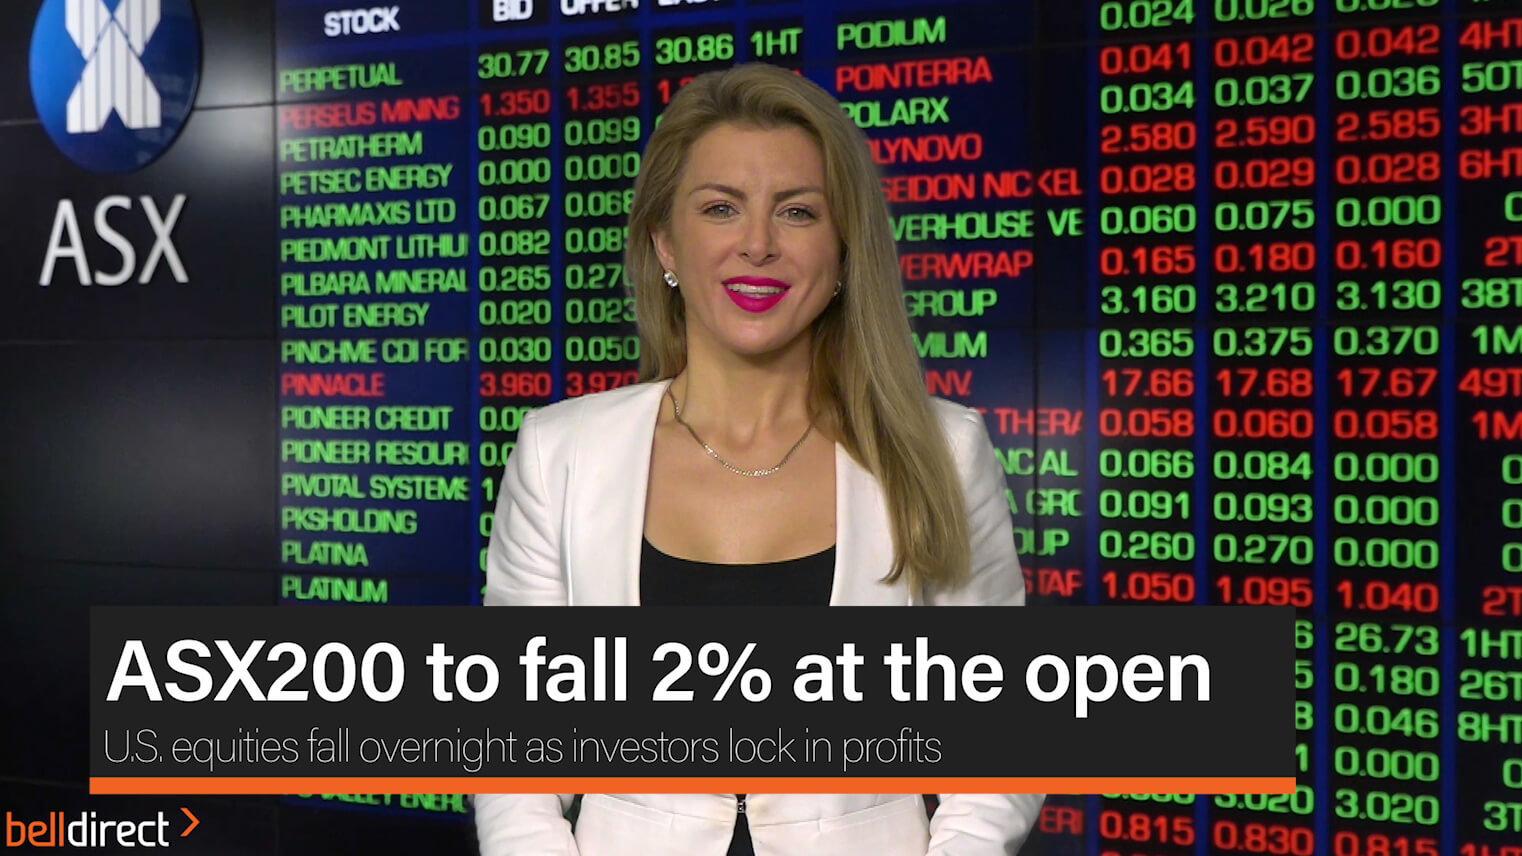 ASX200 to fall 2% at the open